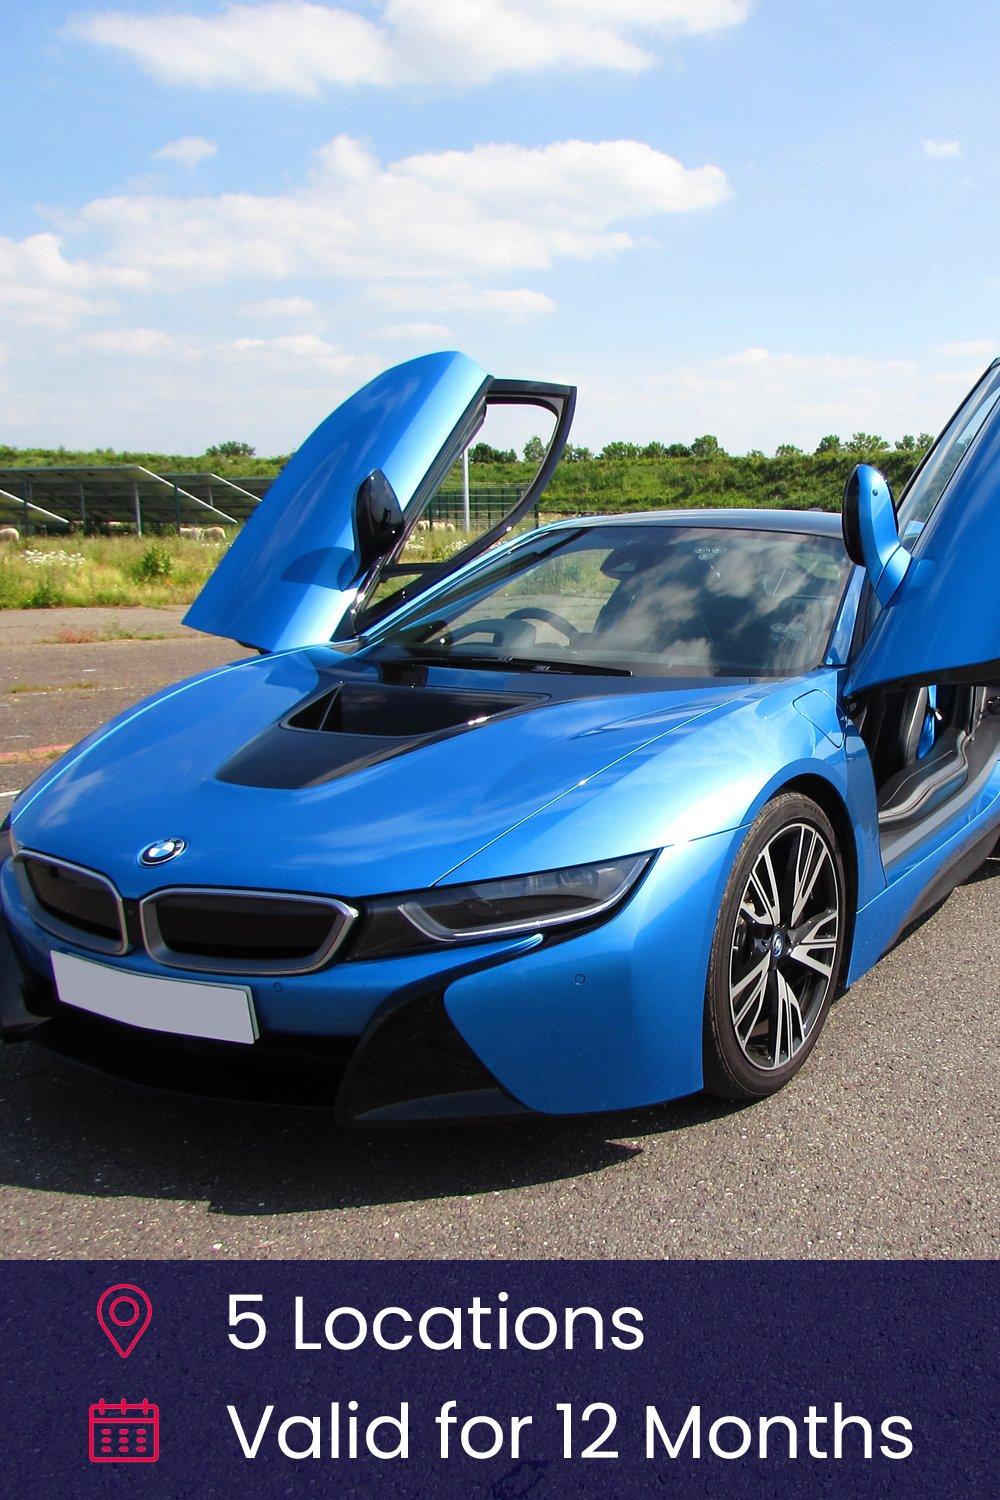 Activity Superstore Electric Supercar Blast - BMW i8 Gift Experience